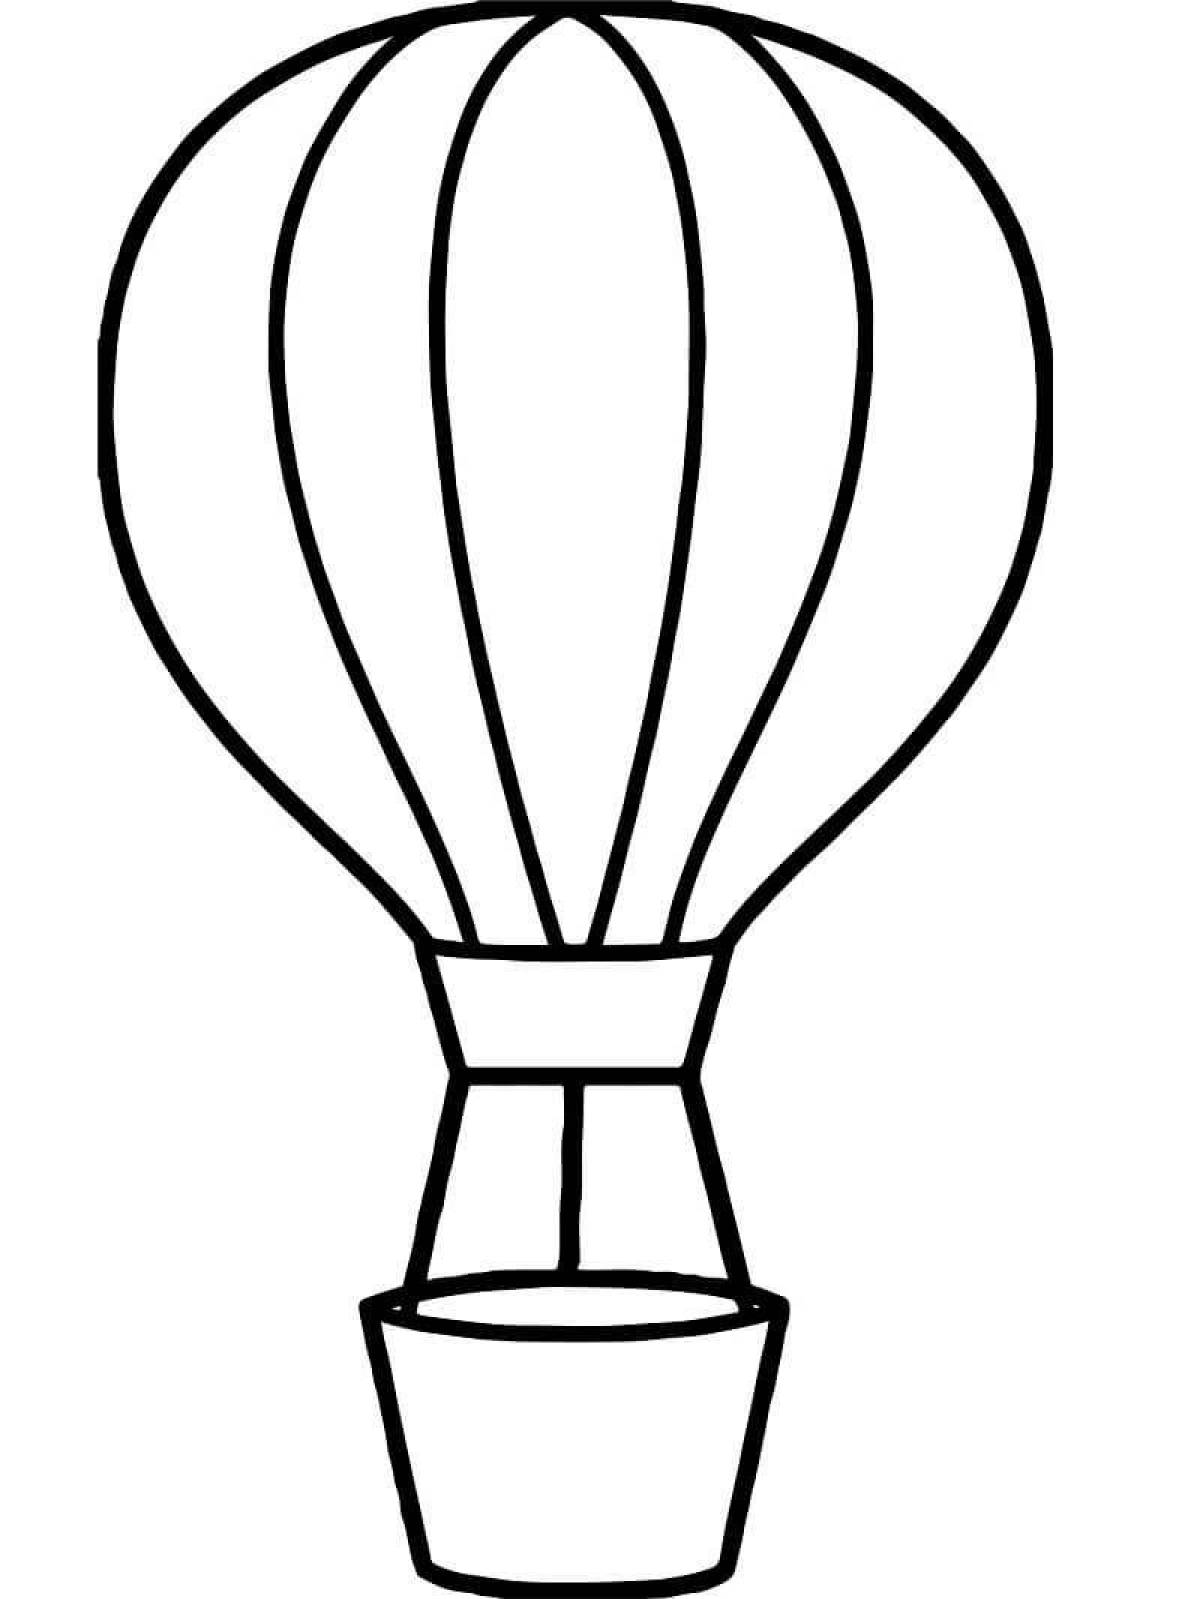 Coloring playful balloon with a basket